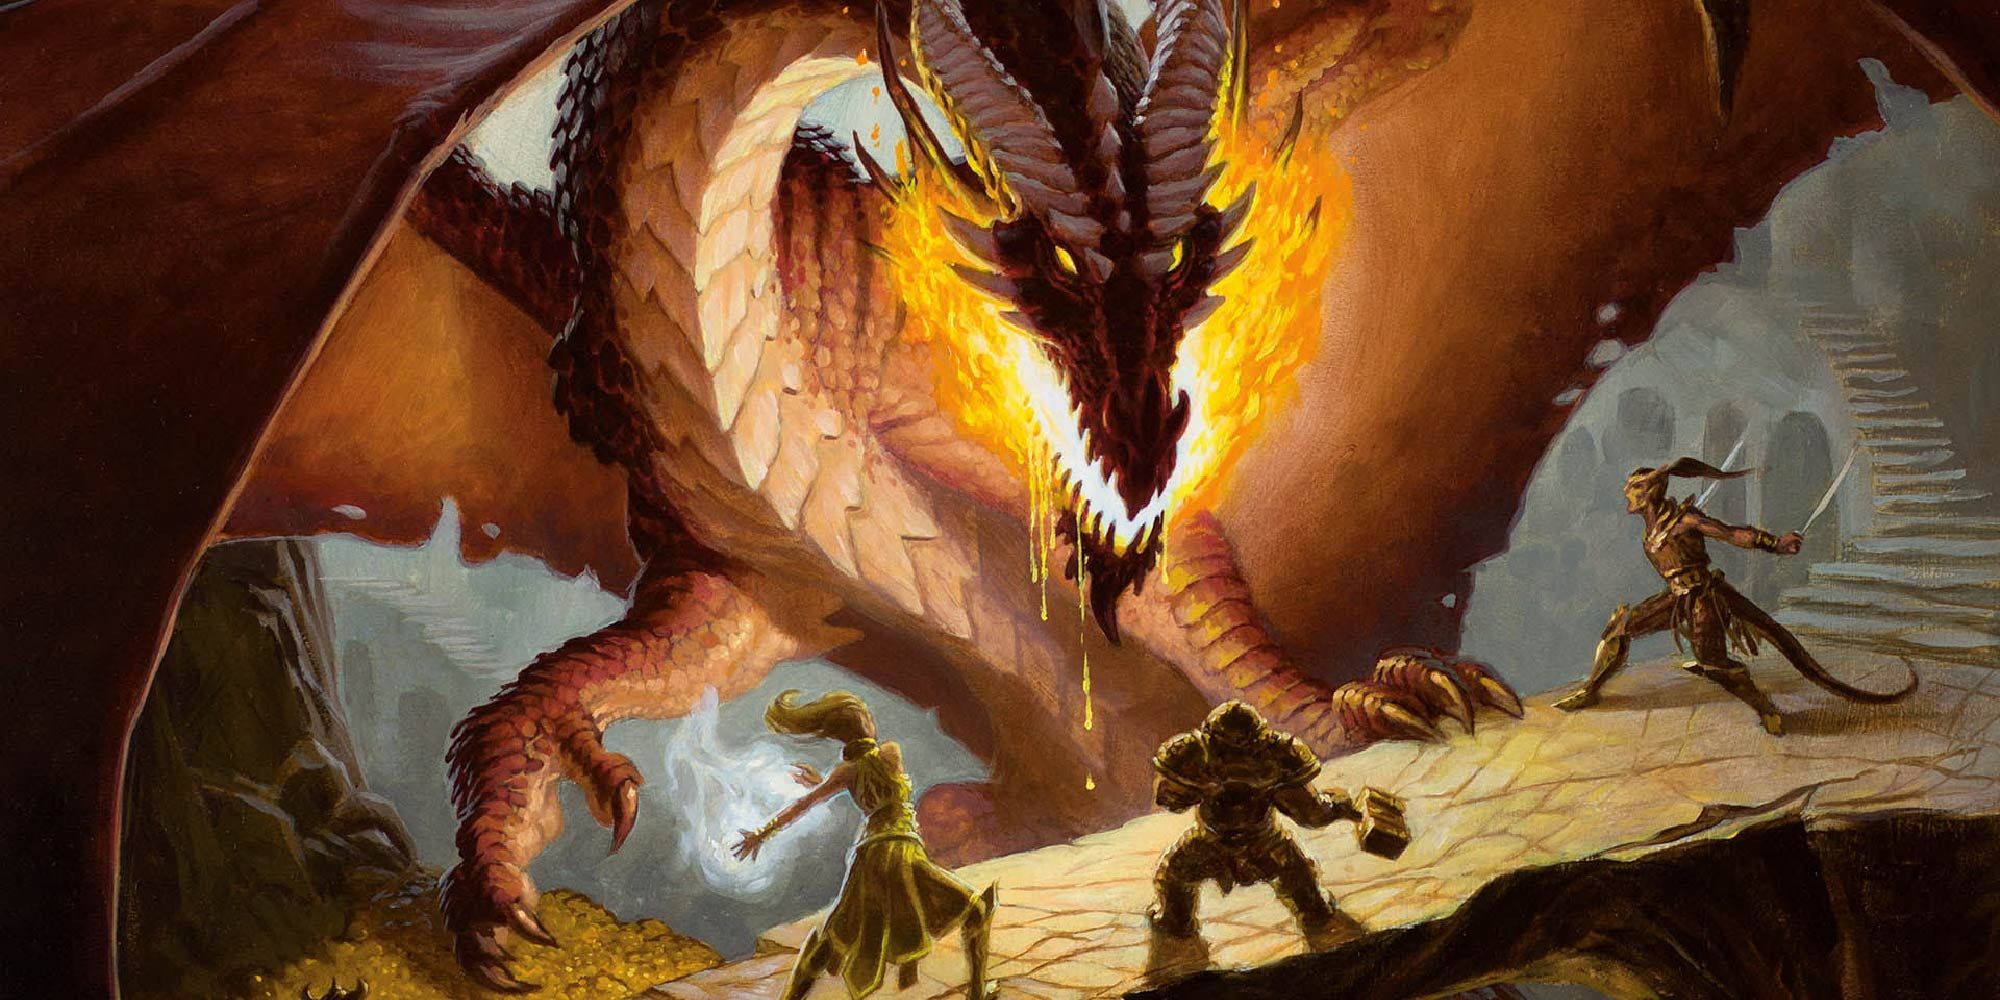 10 Tabletop Games You Should Play If You Love Dungeons Dragons